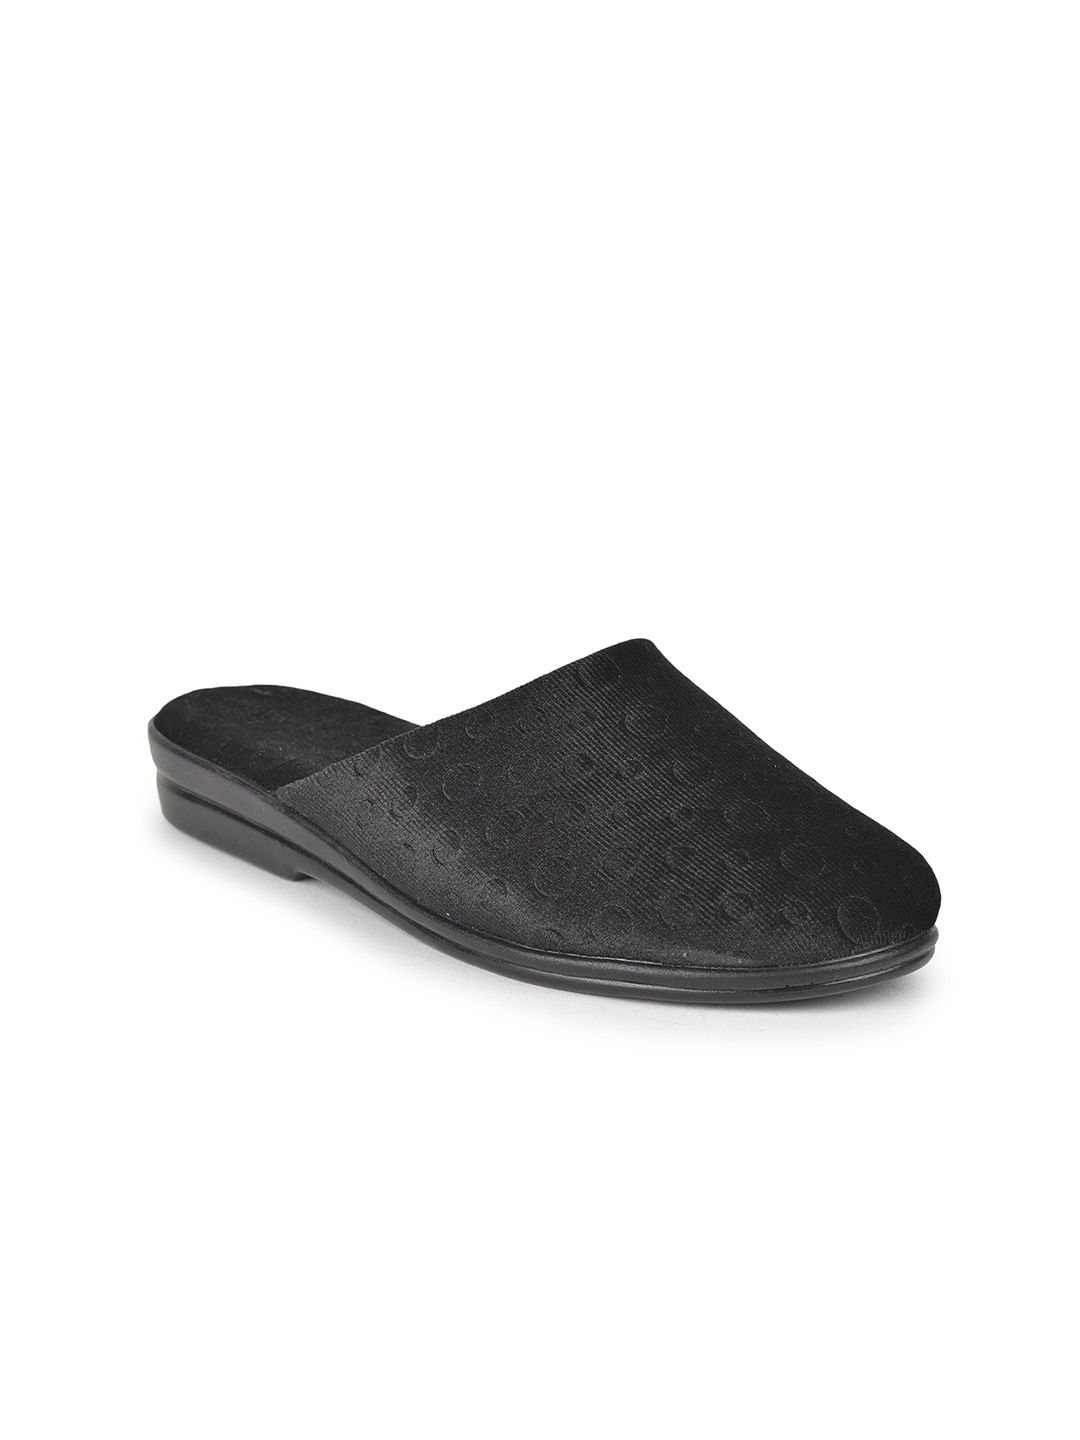 Liberty Women Black Textured Mules Price in India